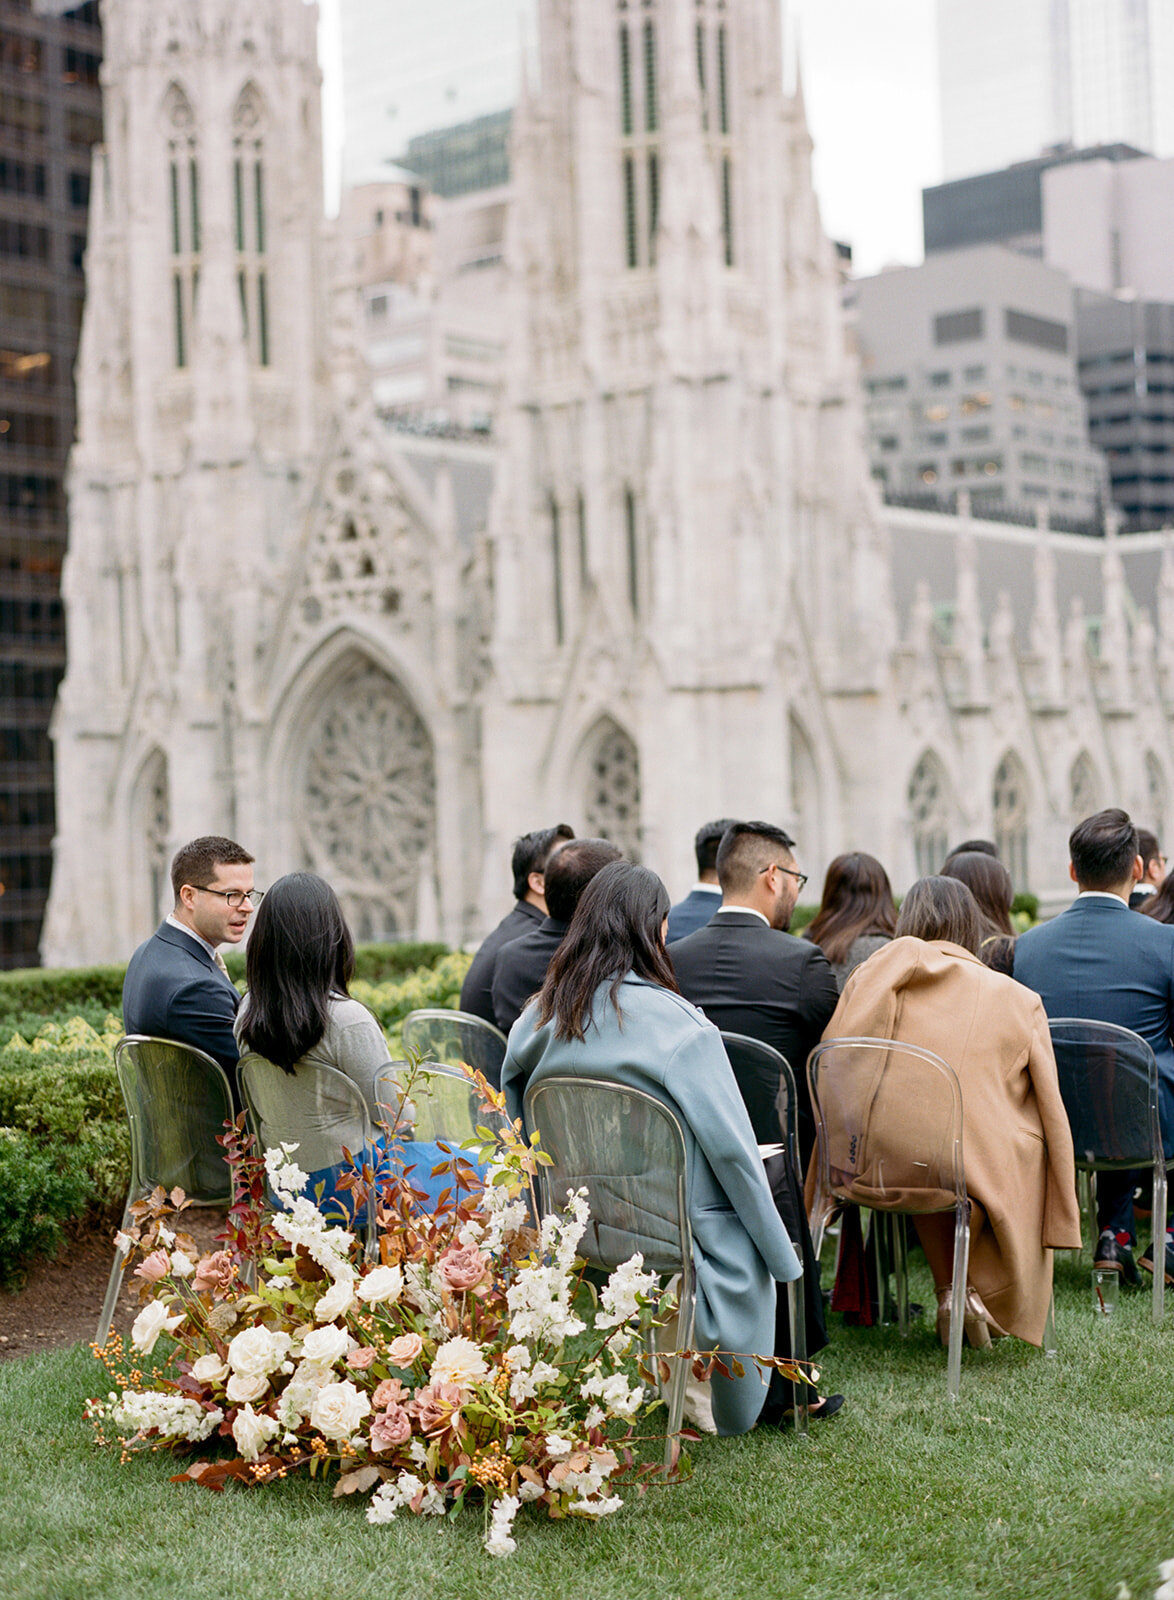 Floral growing garden behind guests chairs at wedding ceremony